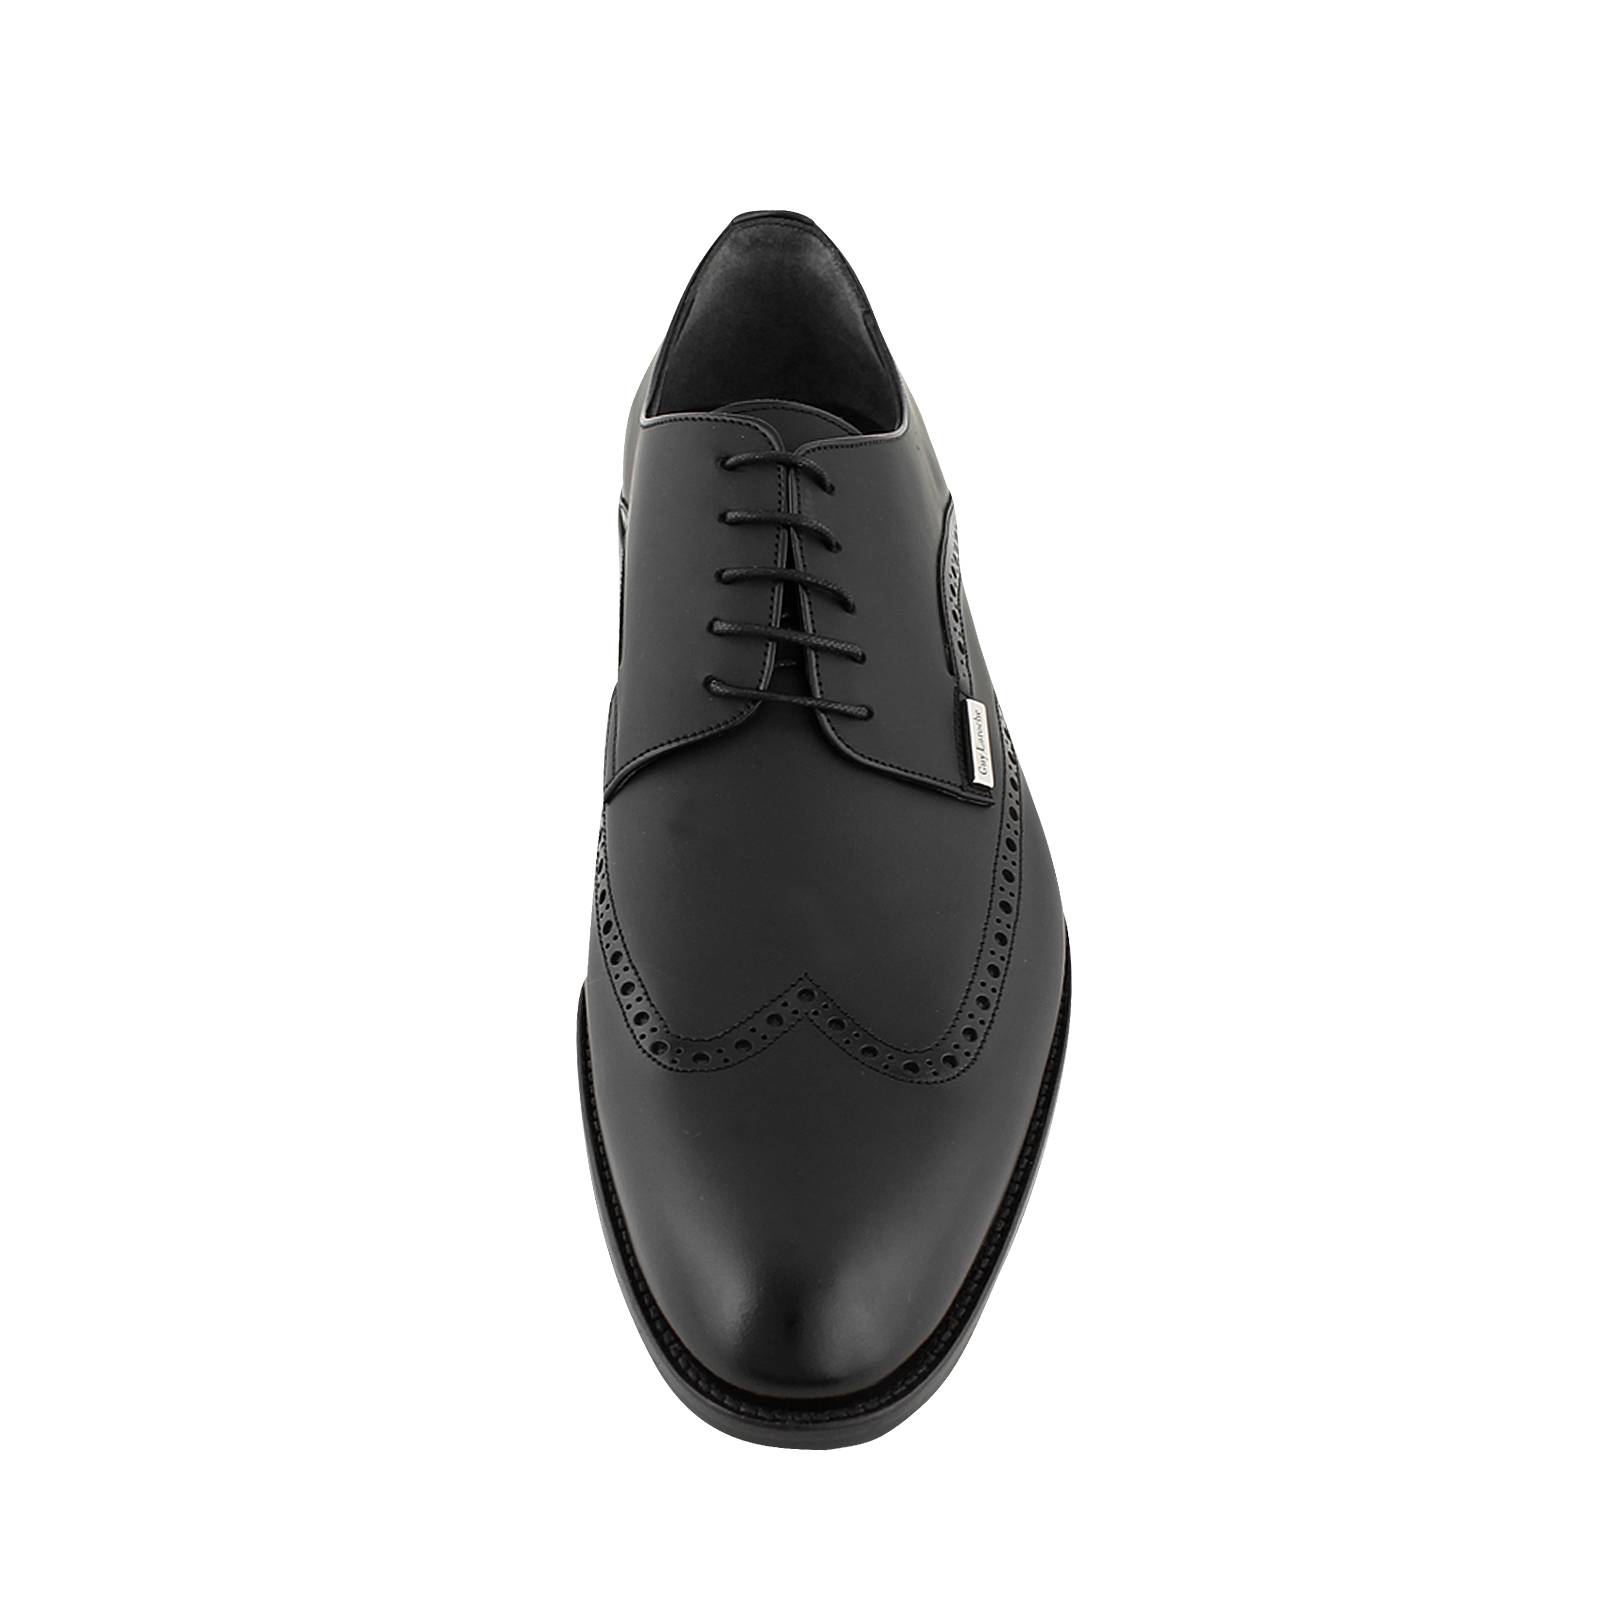 Sibaura - Guy Laroche Men's lace-up shoes made of leather - Gianna ...